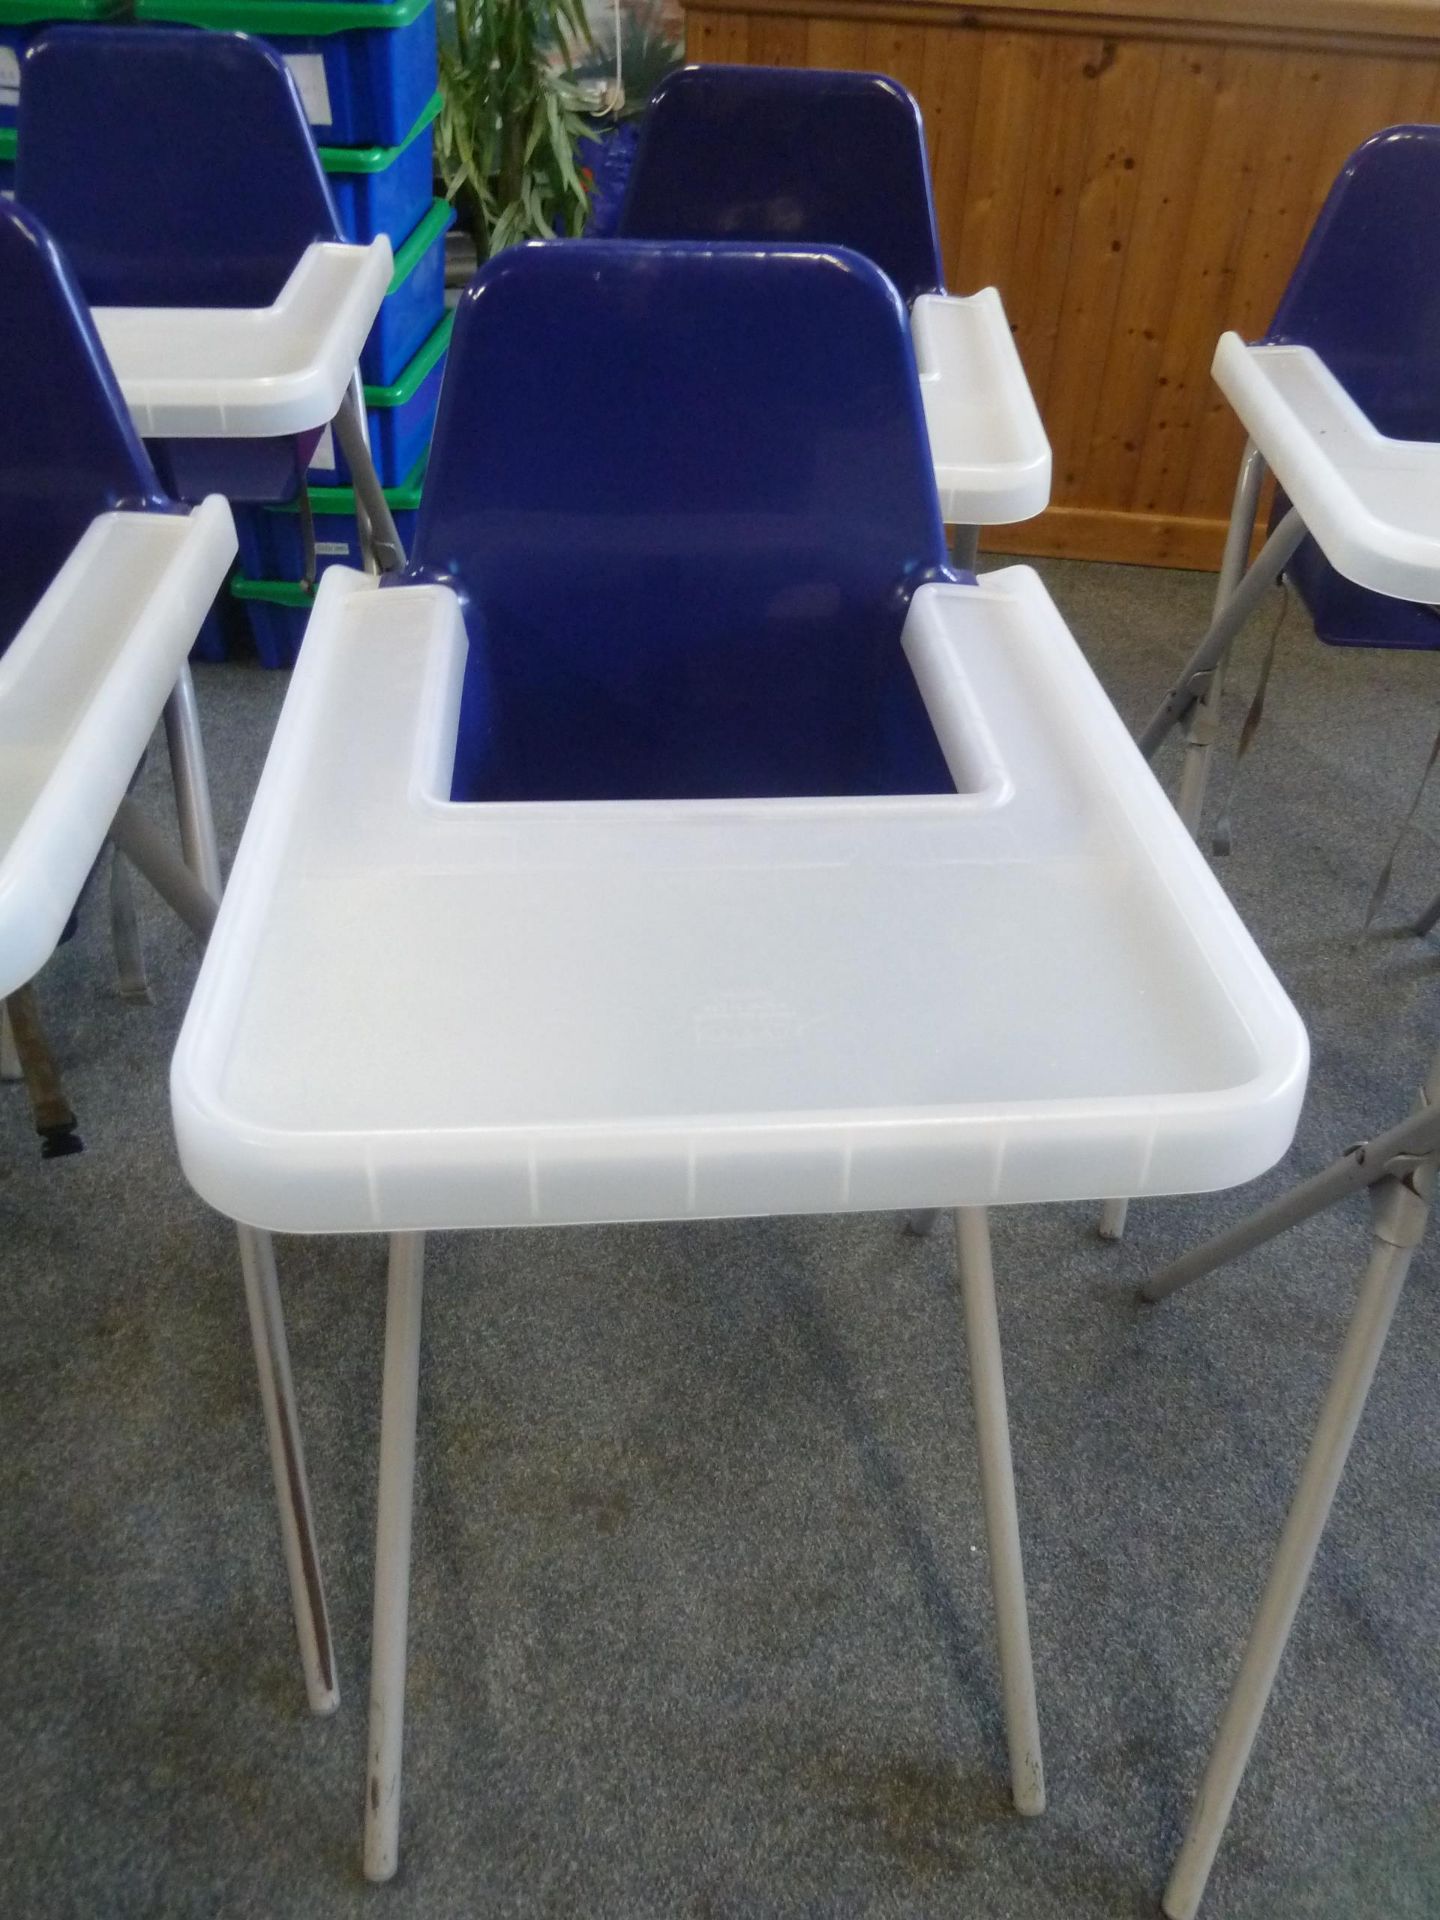 *4 x high chairs - plastic seat and tray with metal x-frame legs - Image 3 of 3